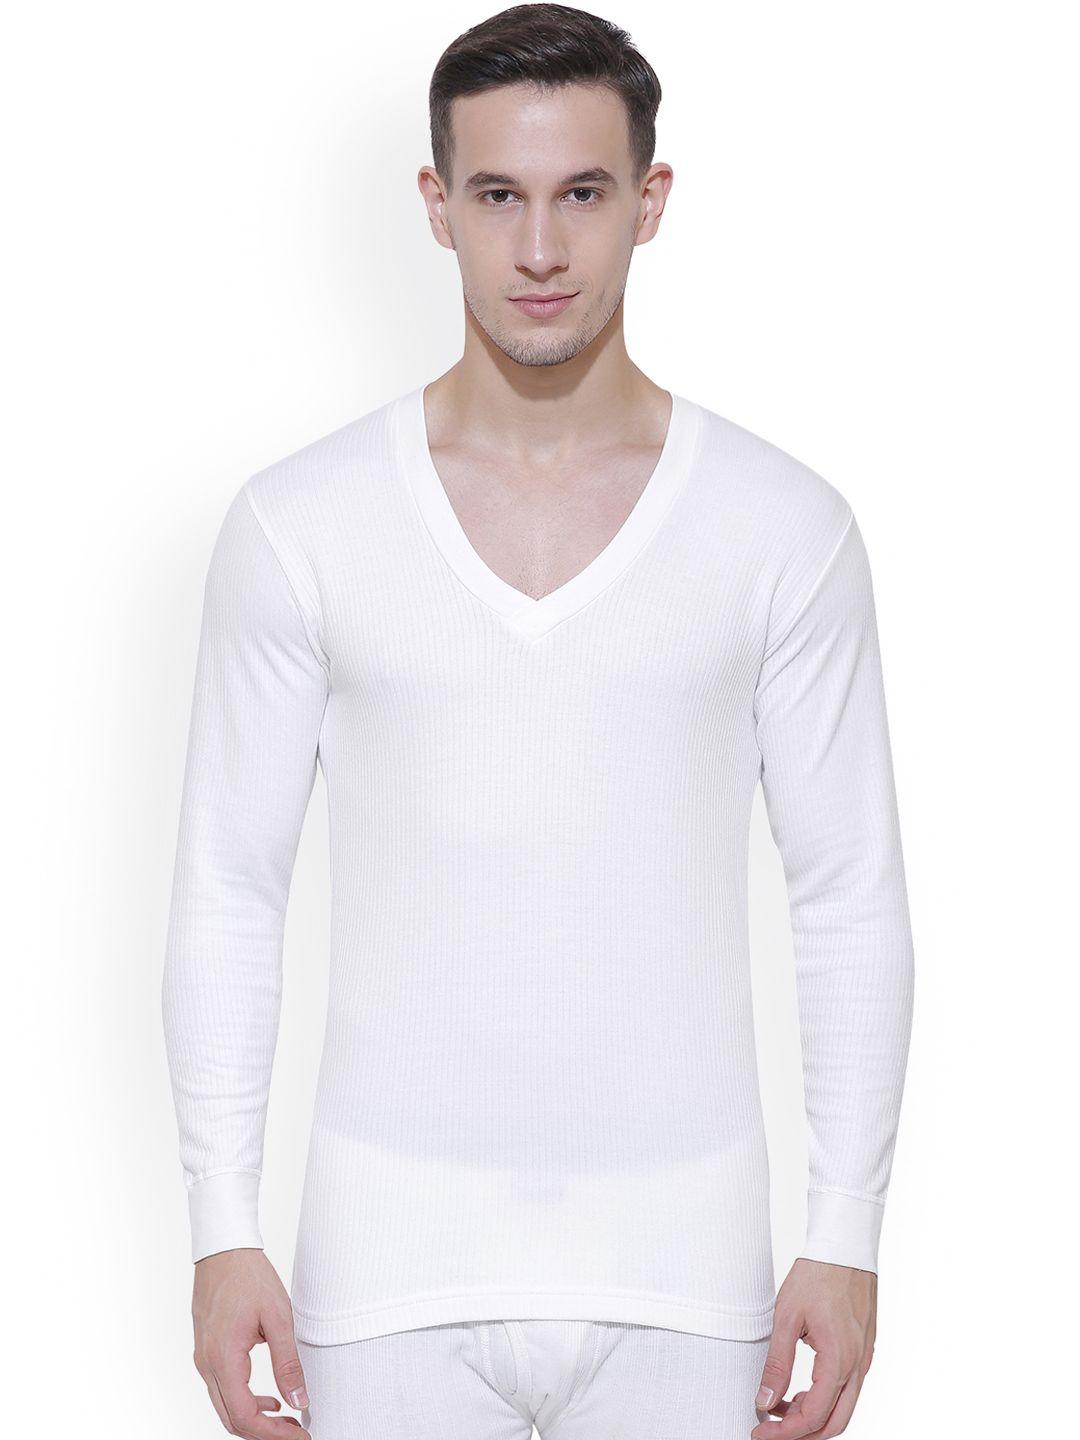 bodycare insider men off white solid thermal top b104_90